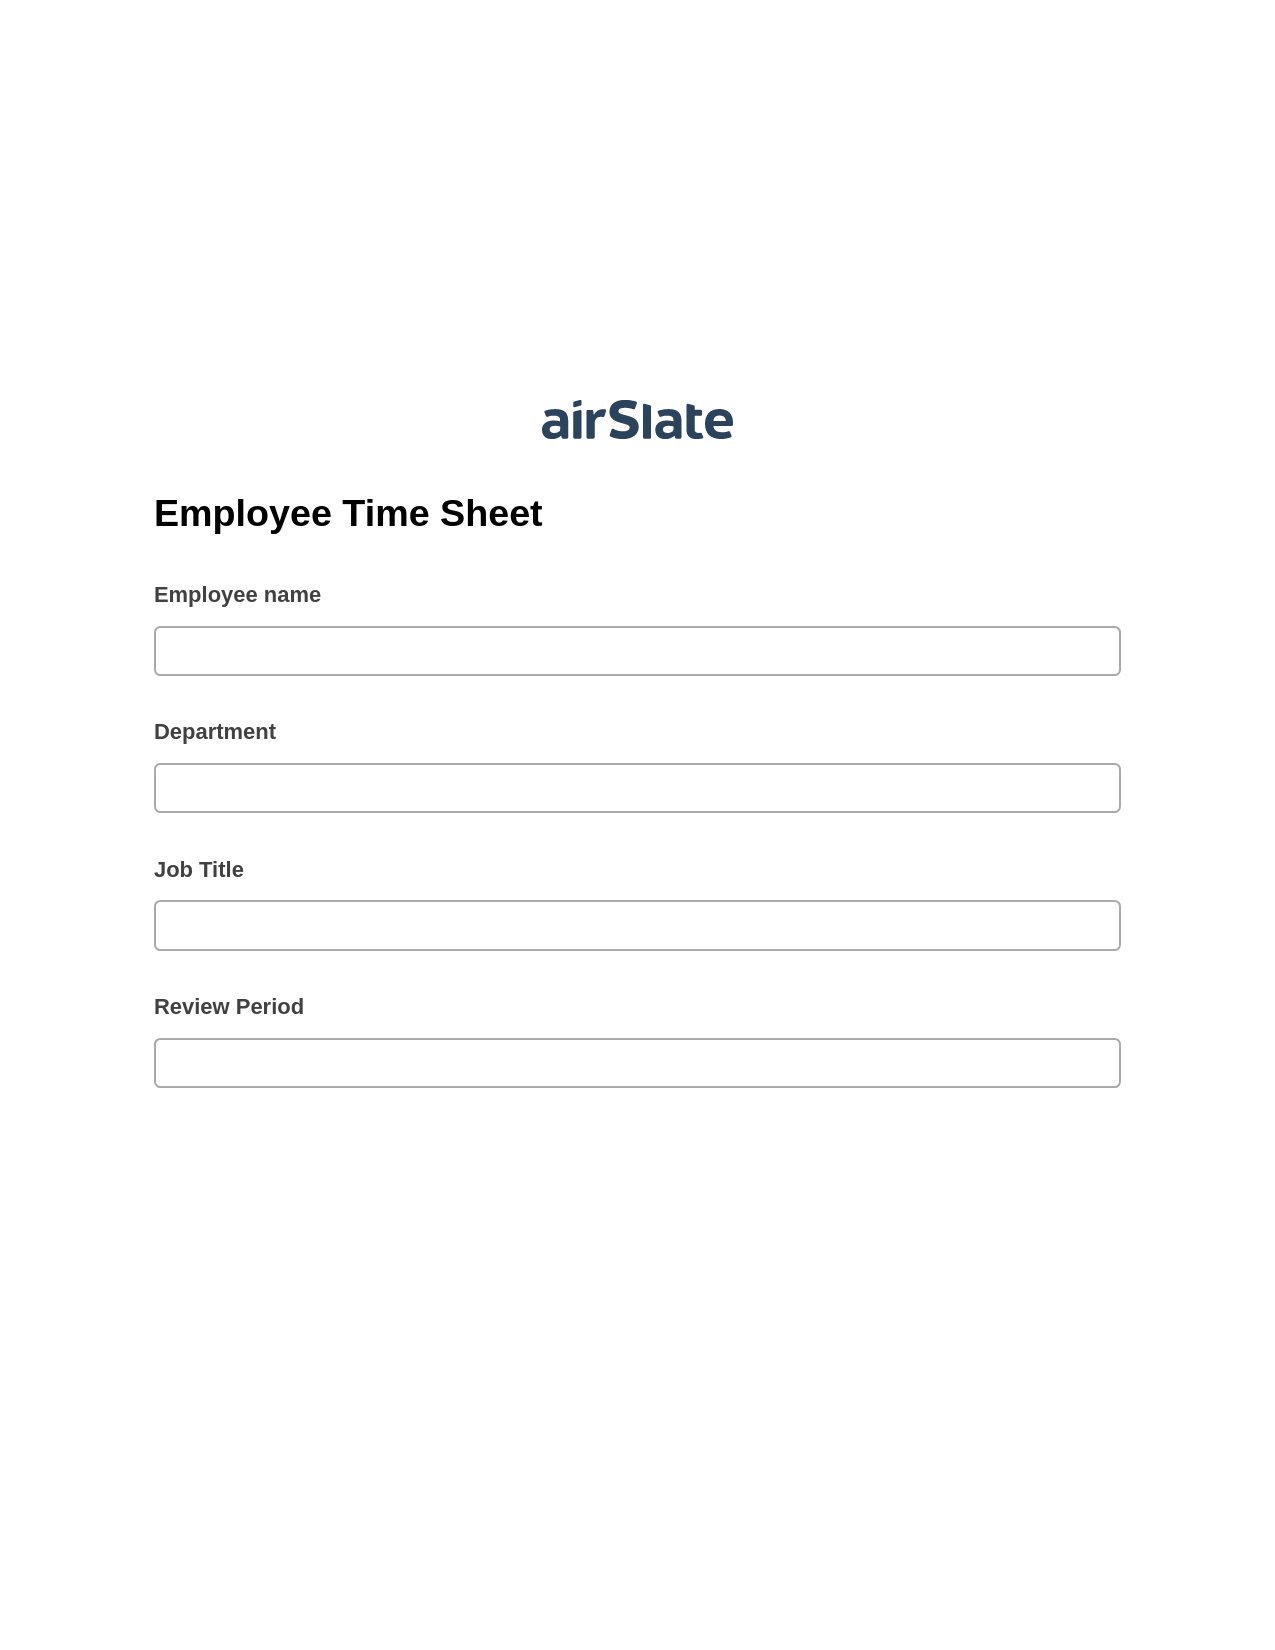 Multirole Employee Time Sheet Pre-fill from CSV File Bot, Roles Reminder Bot, Text Message Notification Postfinish Bot